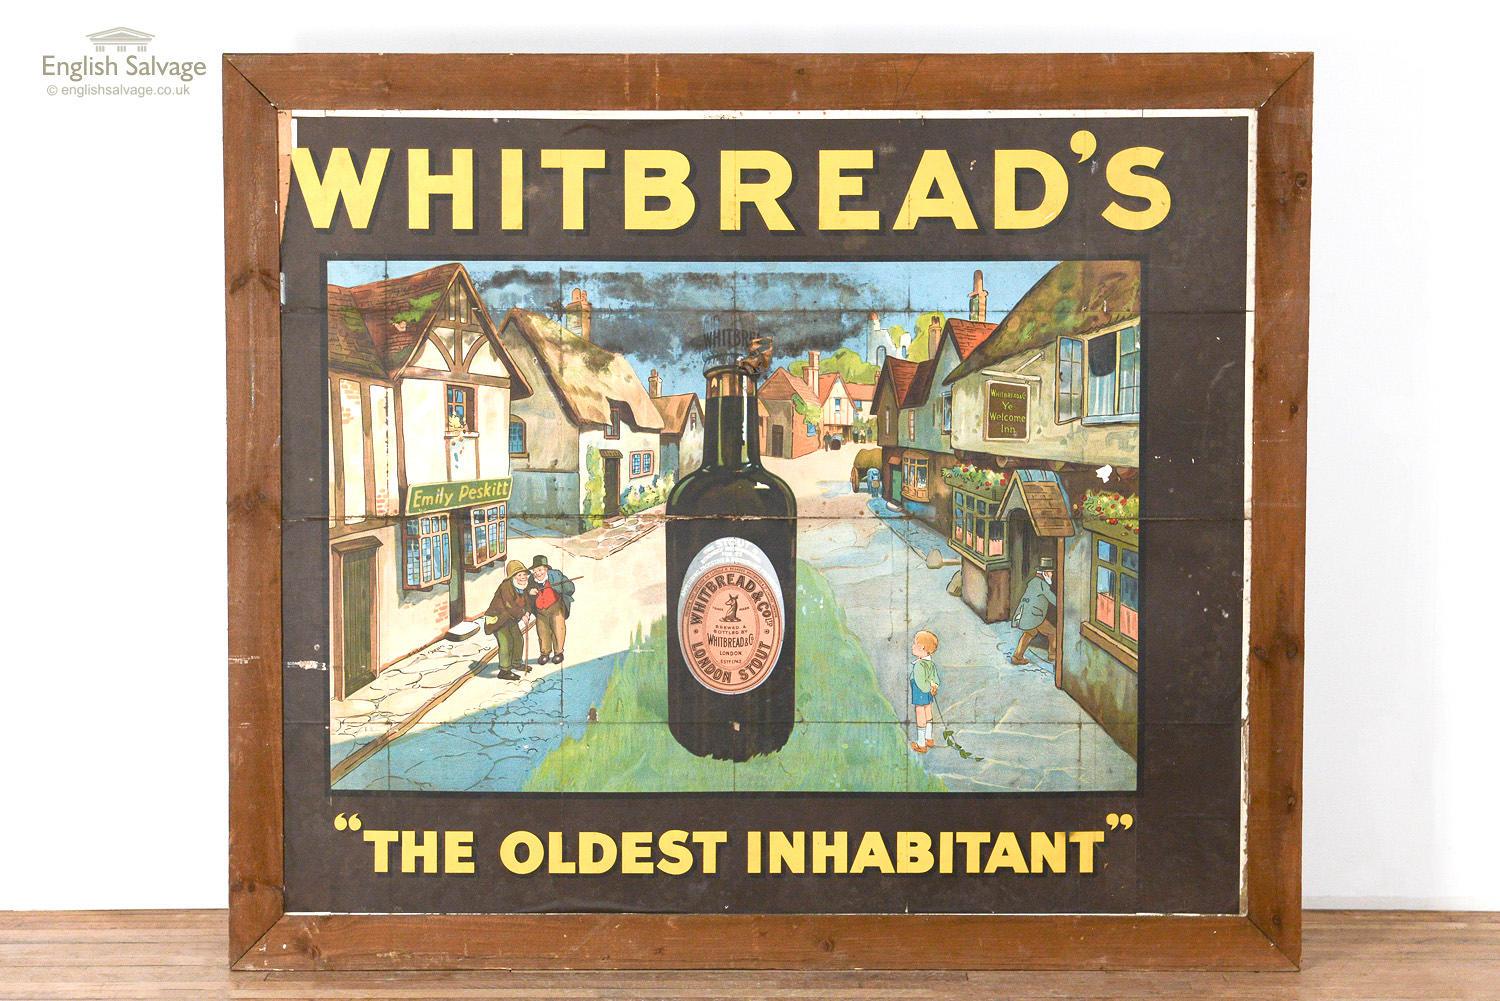 Vintage Whitbread's 'The Oldest Inhabitant' advertising picture in a wooden frame. The size of the picture is 178cm wide x 148cm high, overall size of the frame below. Due to age the picture has a few patches of significant wear and some tearing.